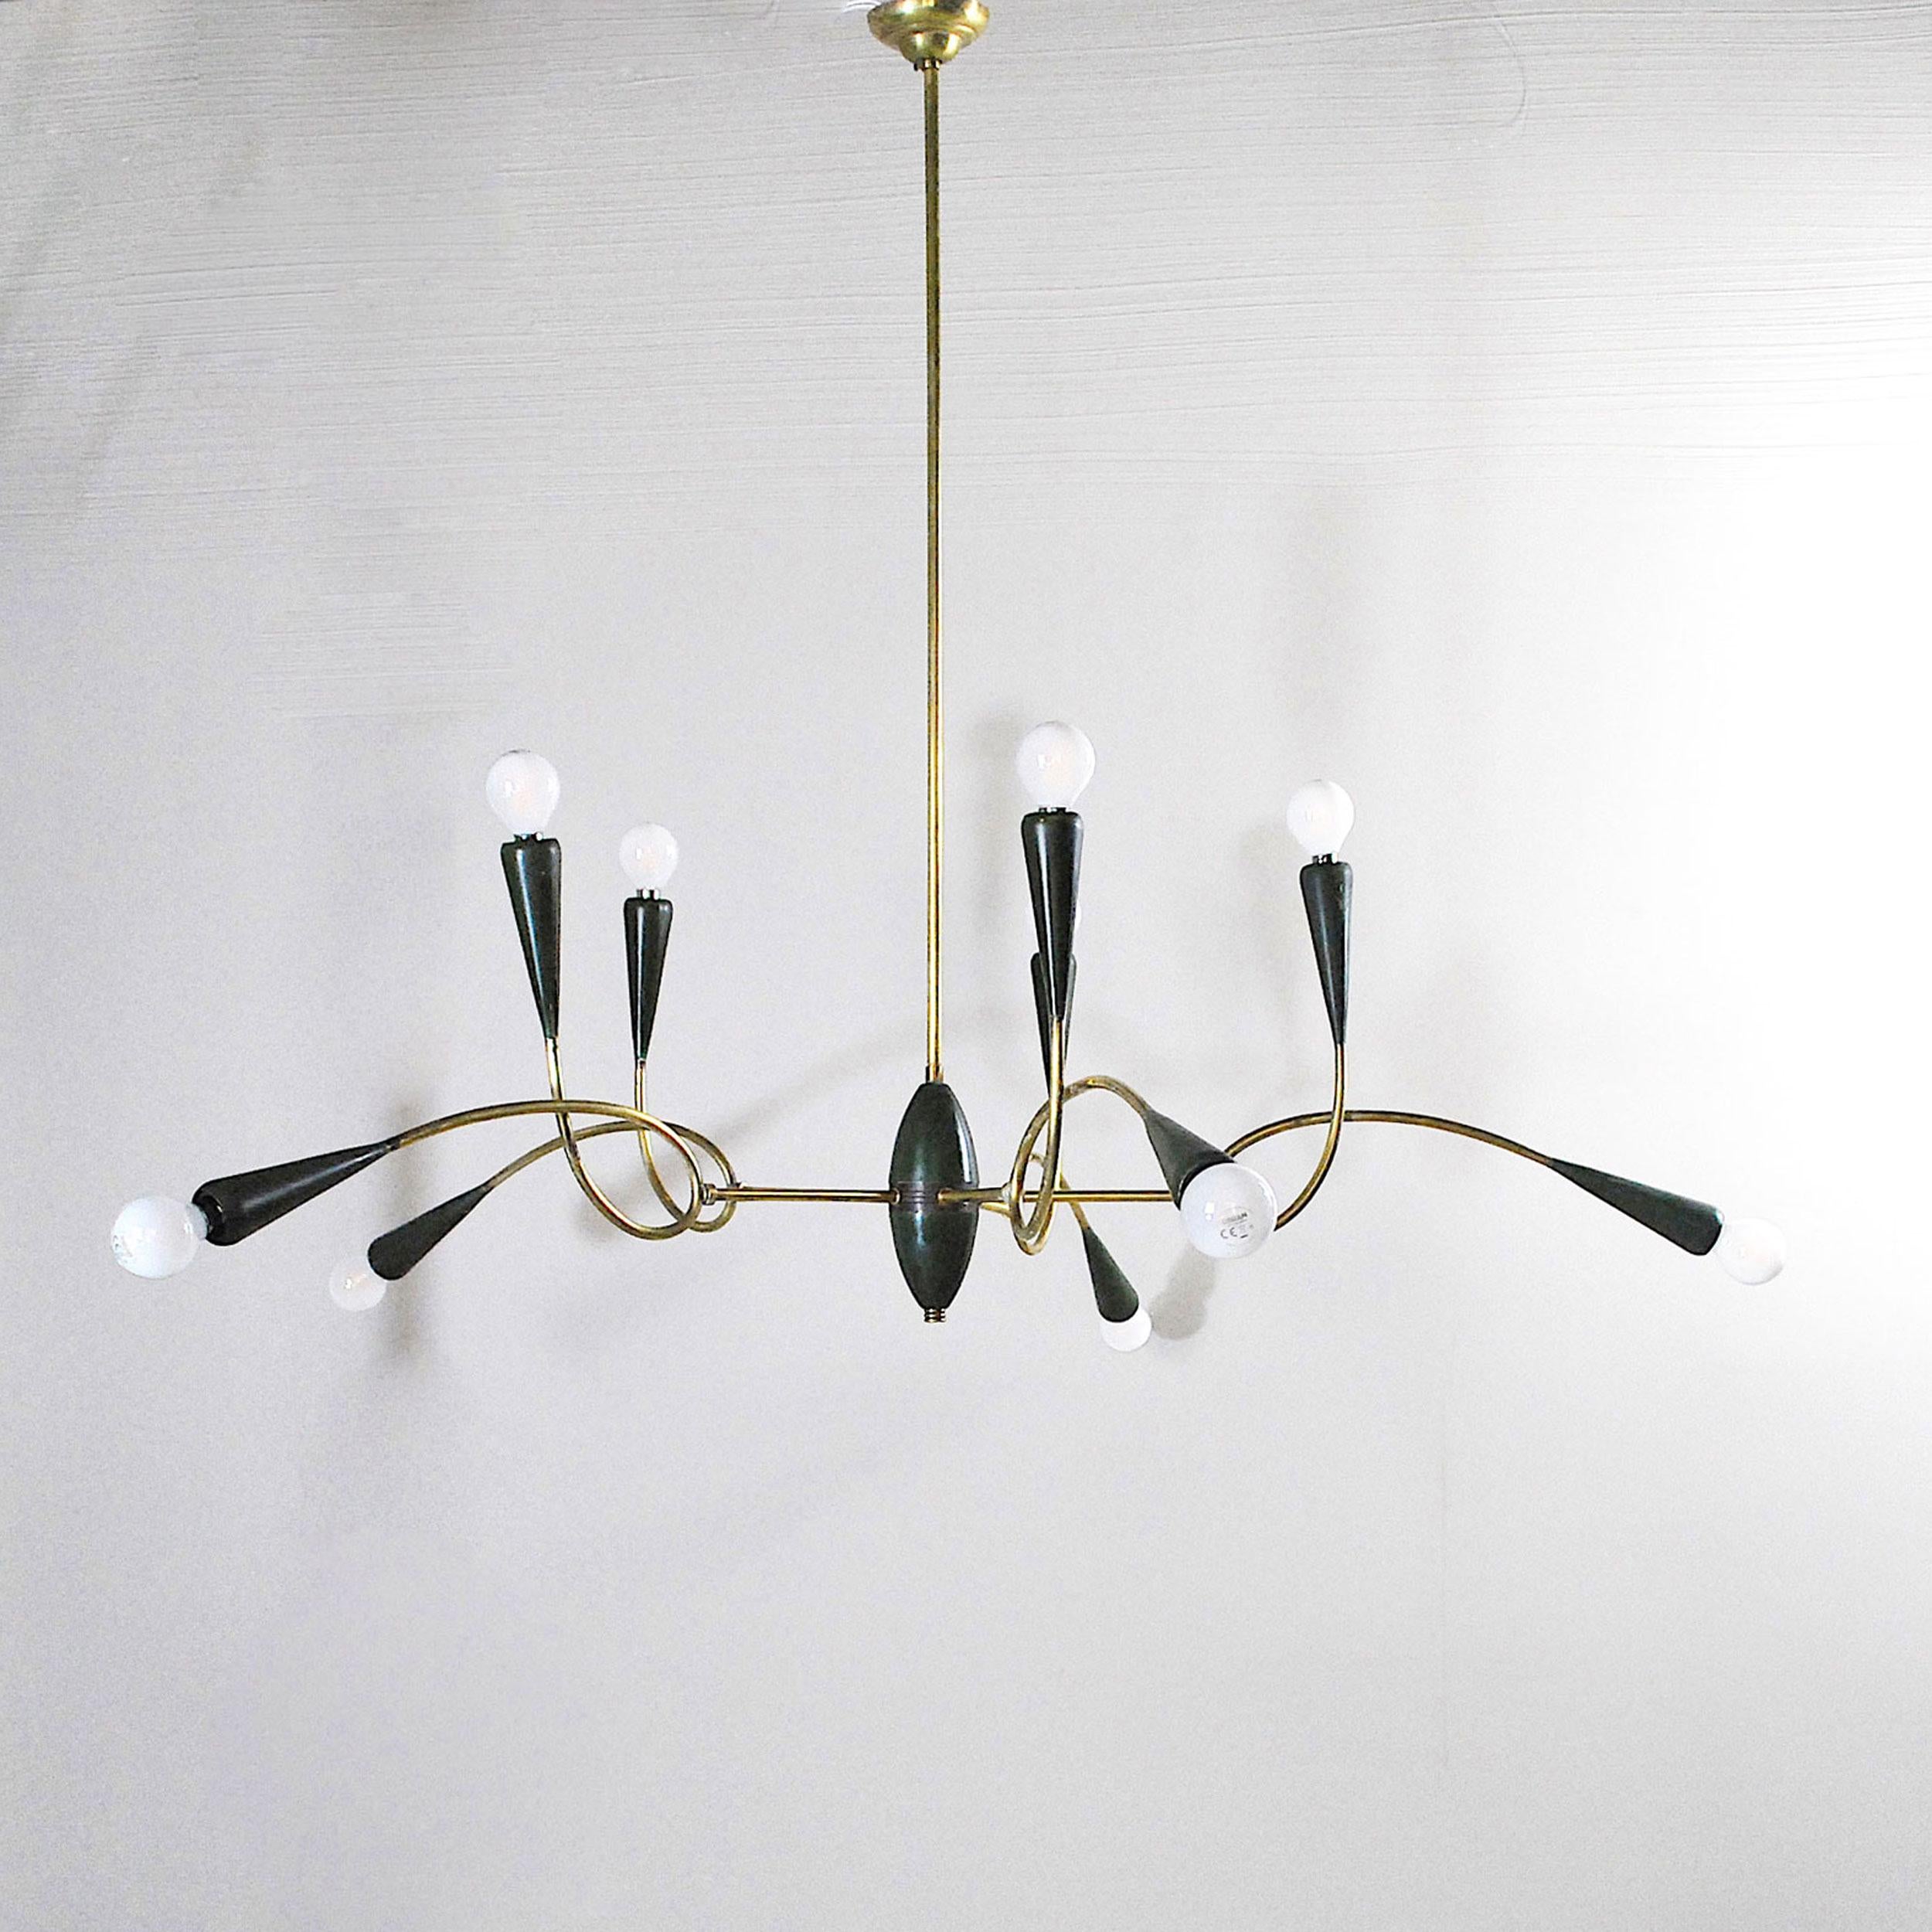 Italian Midcentury Chandelier in Brass and Aluminum from 1950s 4